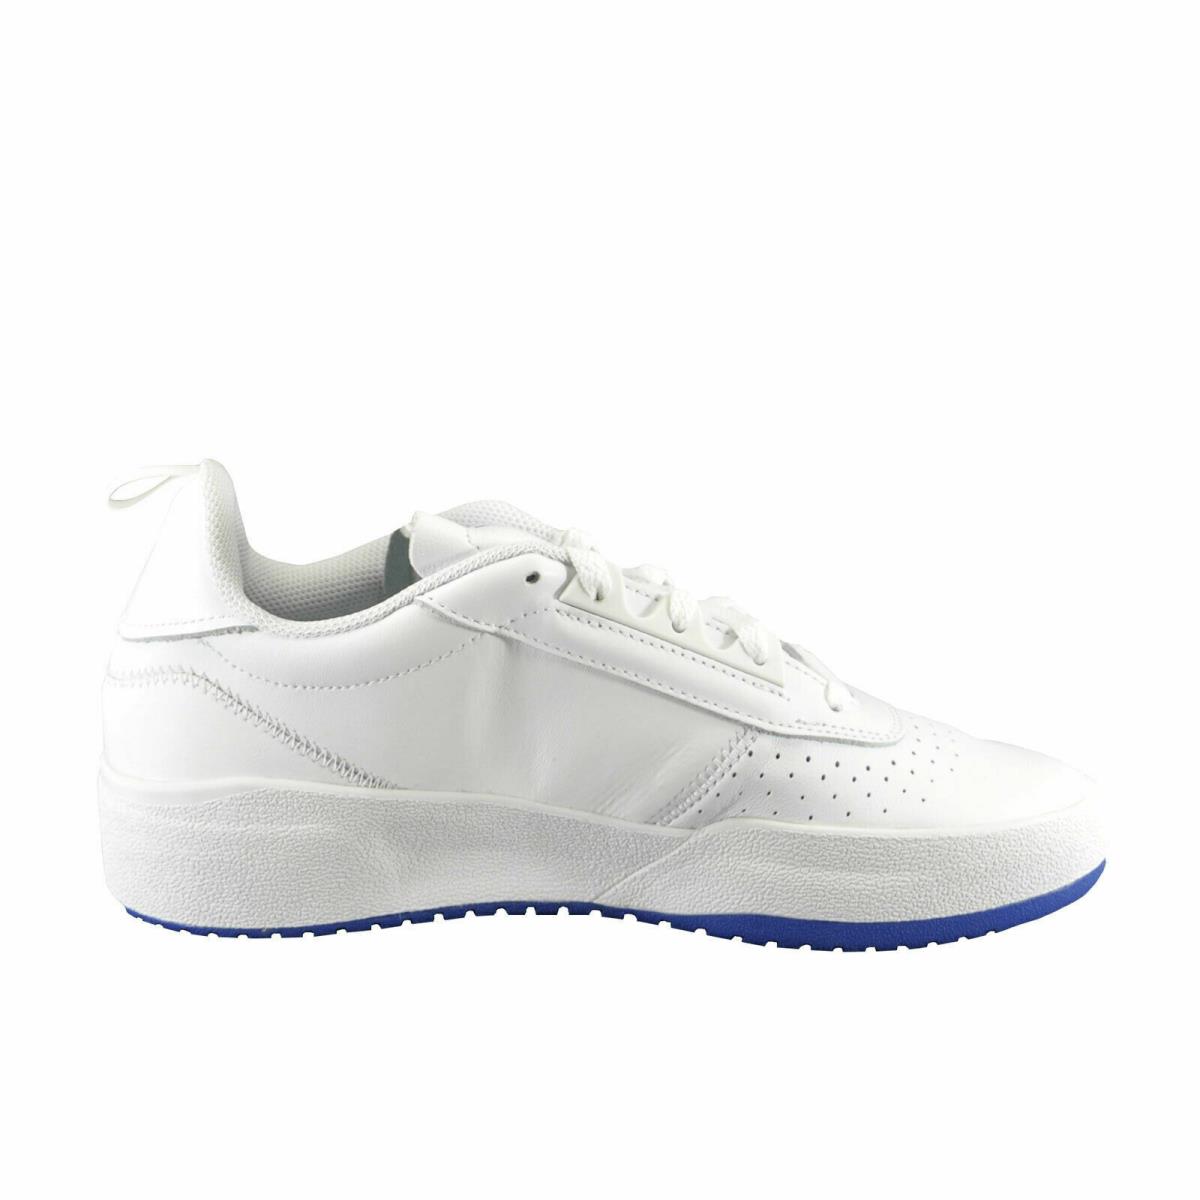 Adidas shoes Liberty Cup - White 1